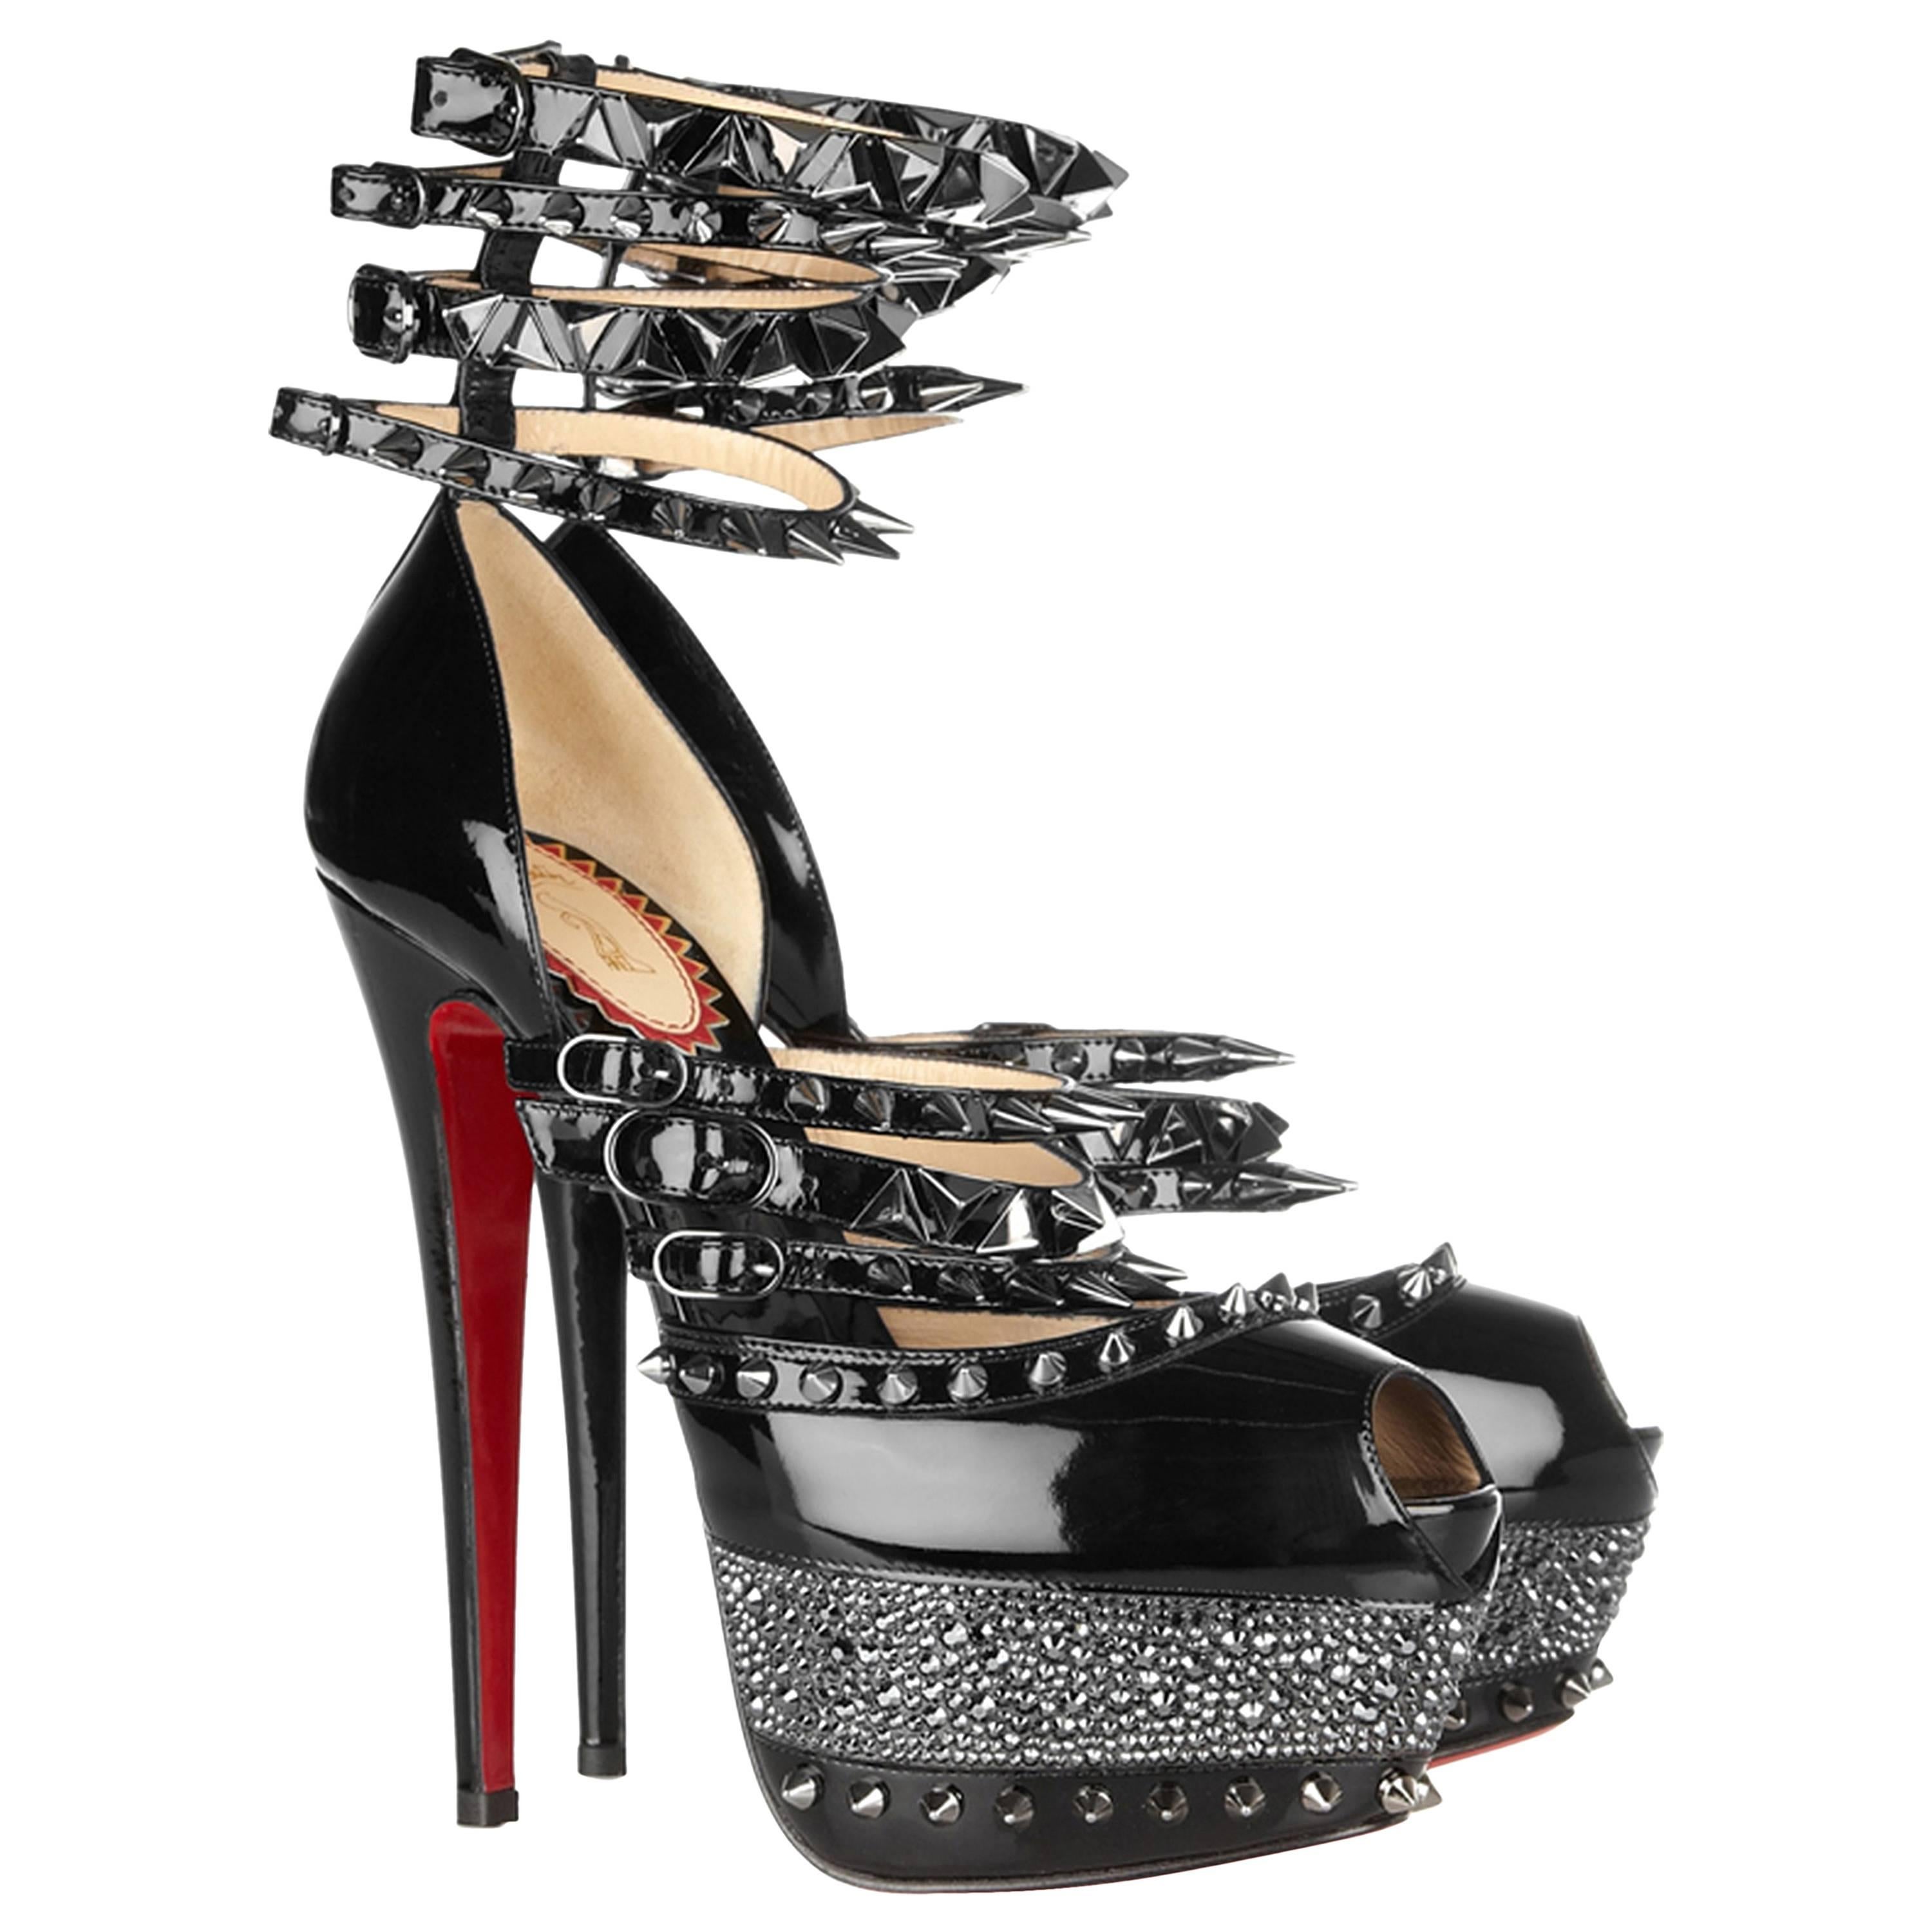 Christian Louboutin 20th Anniversary Isolde Black Patent Shoes New 39